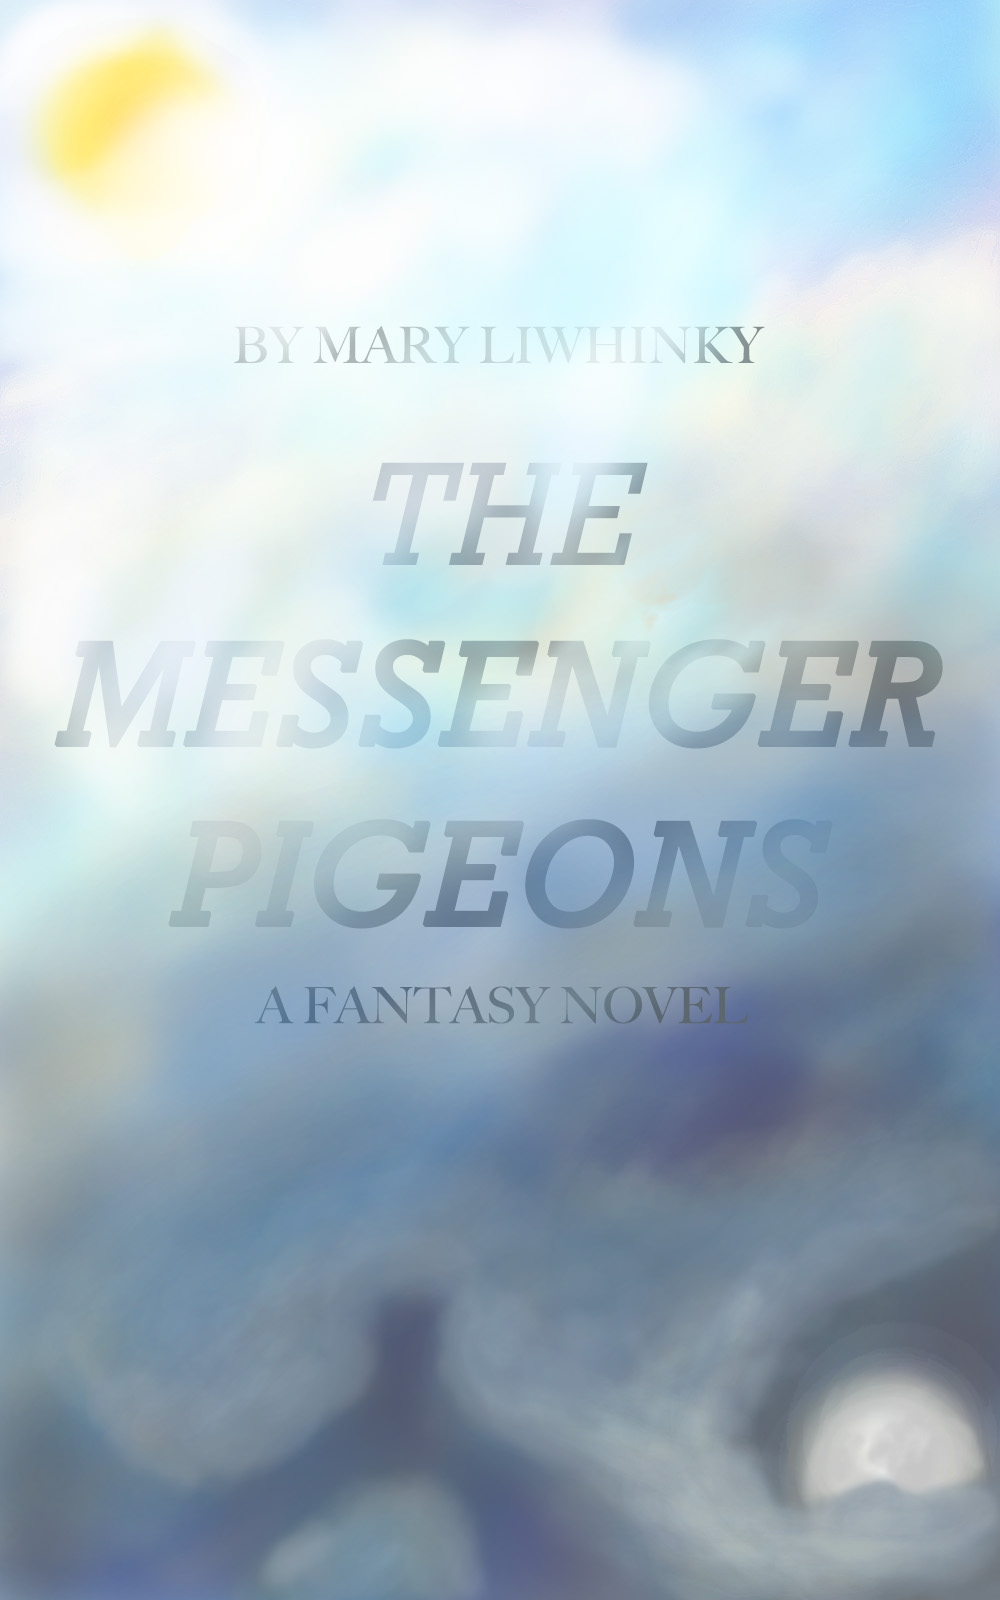 FREE: The Messenger Pigeons by Mary Liwhinky